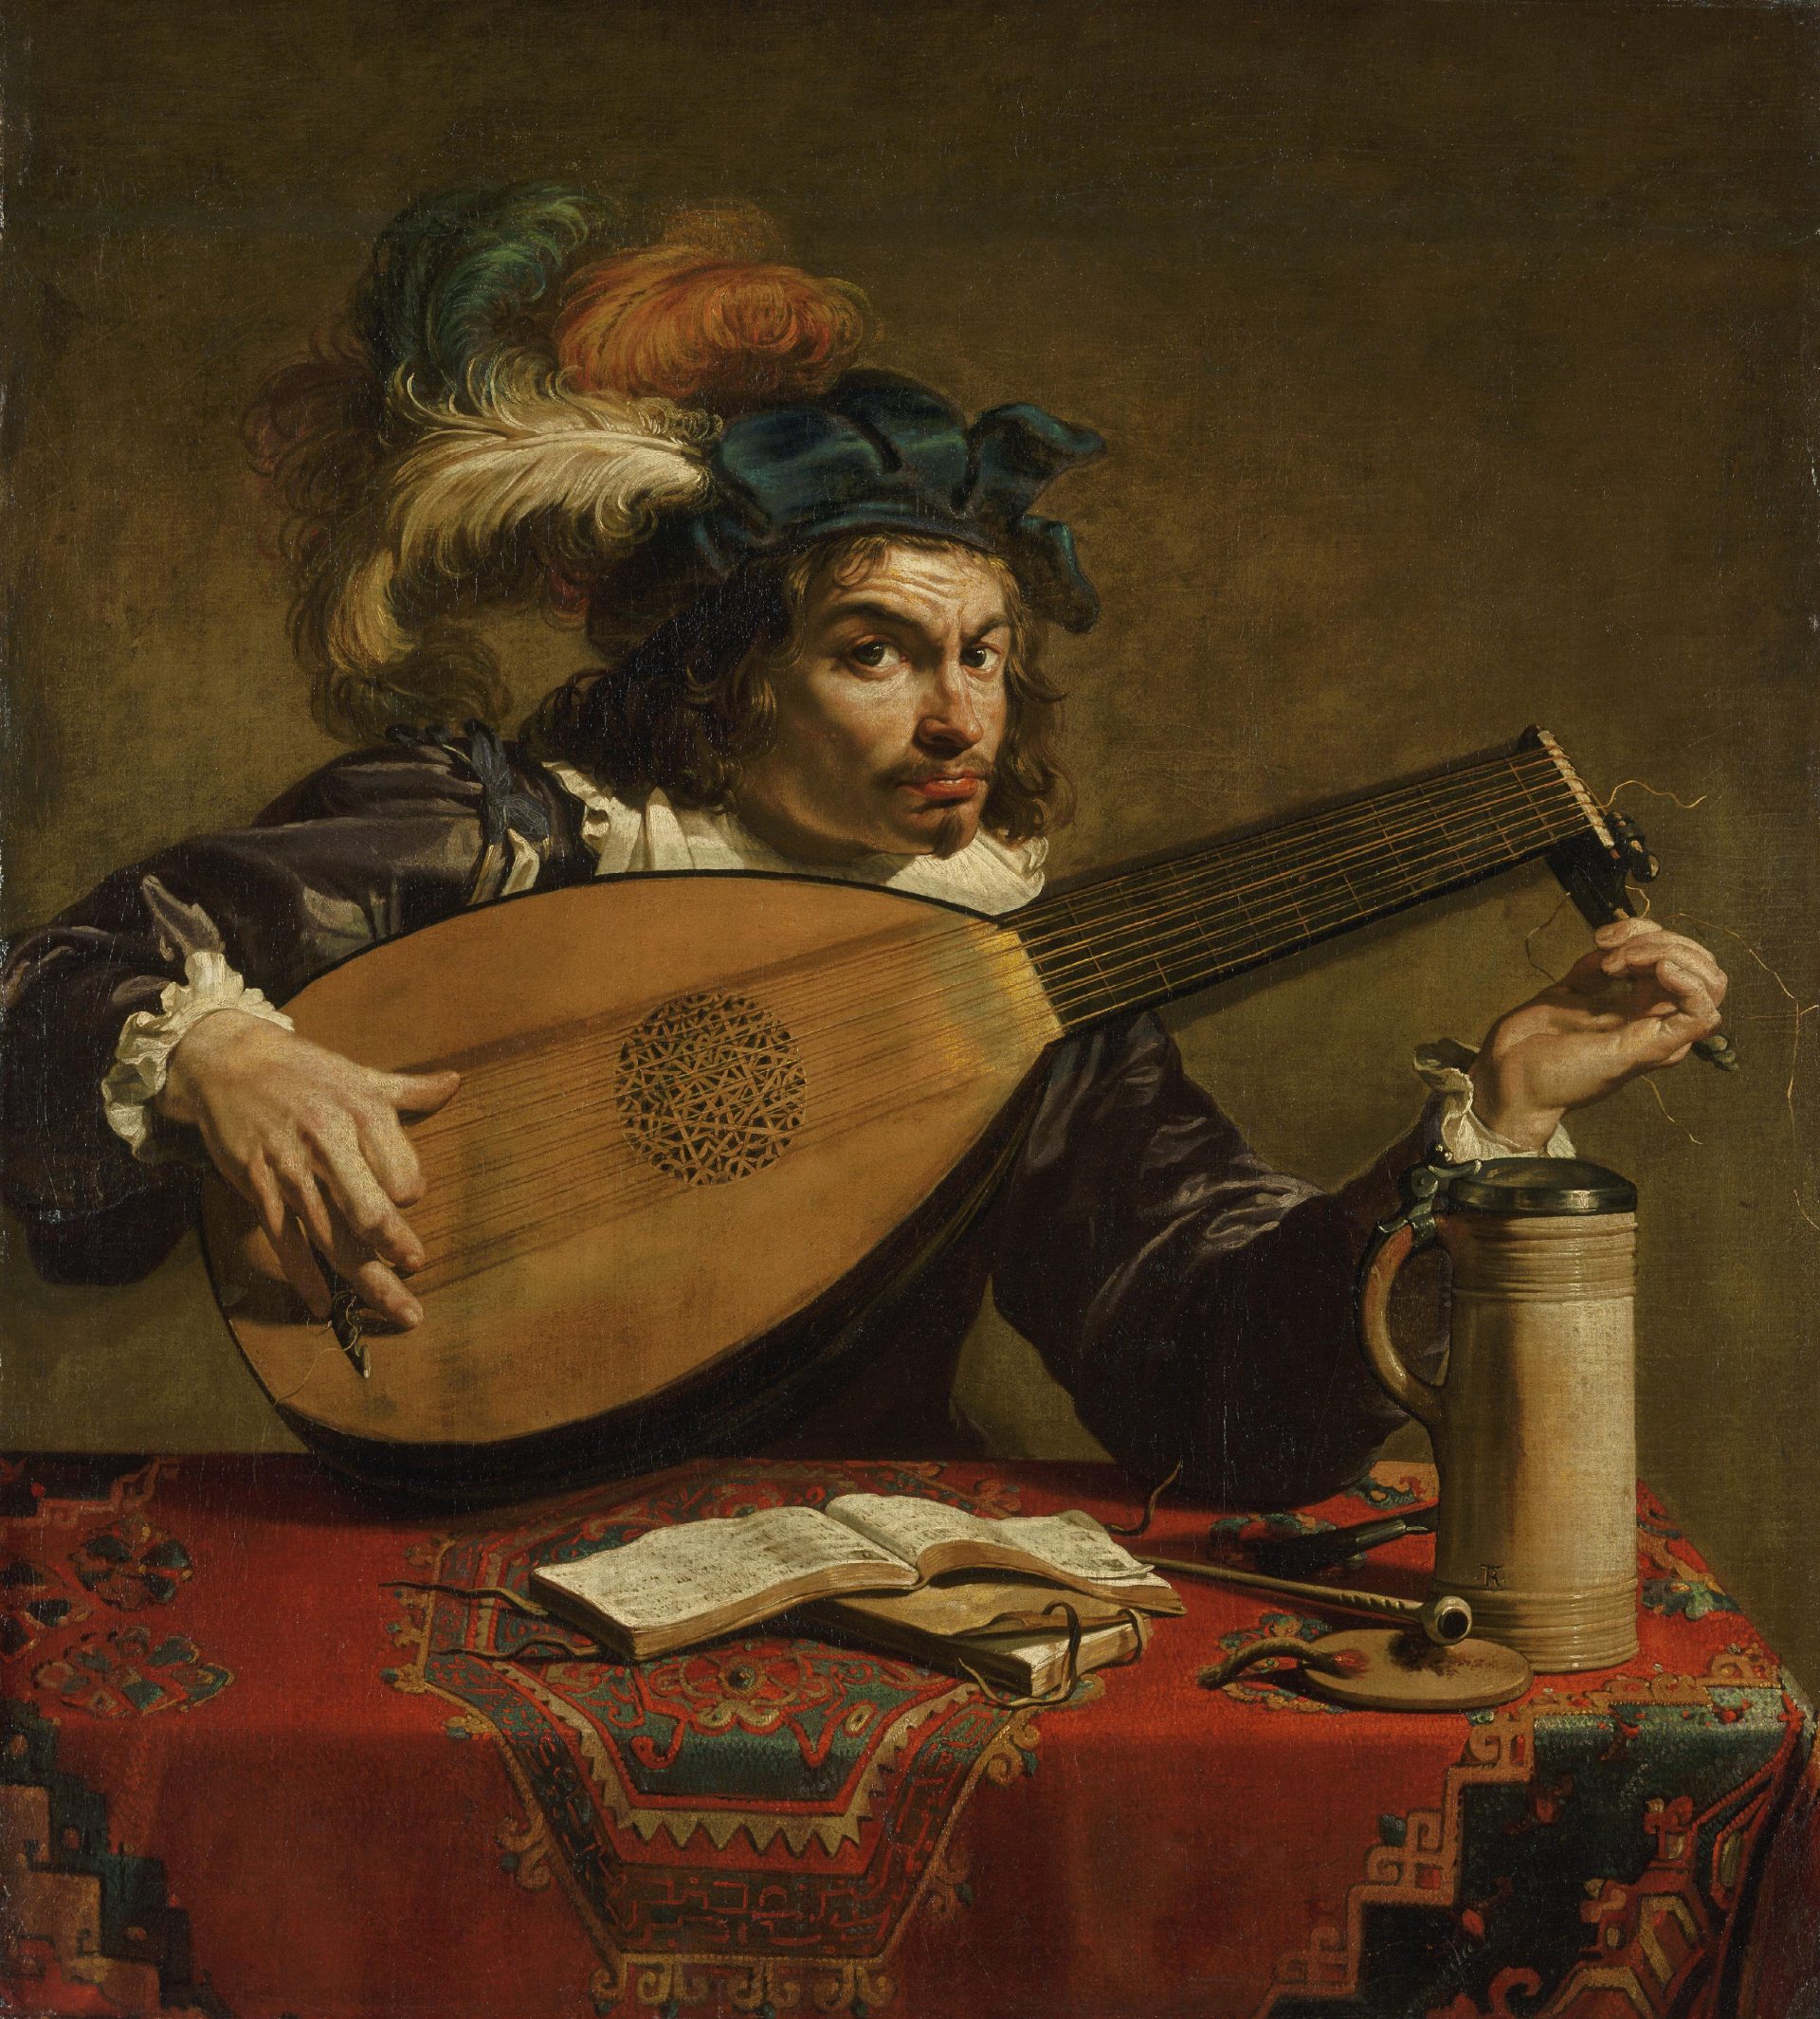 A painting of a renaissance period musician with feathers in his cap, tuning his lute.